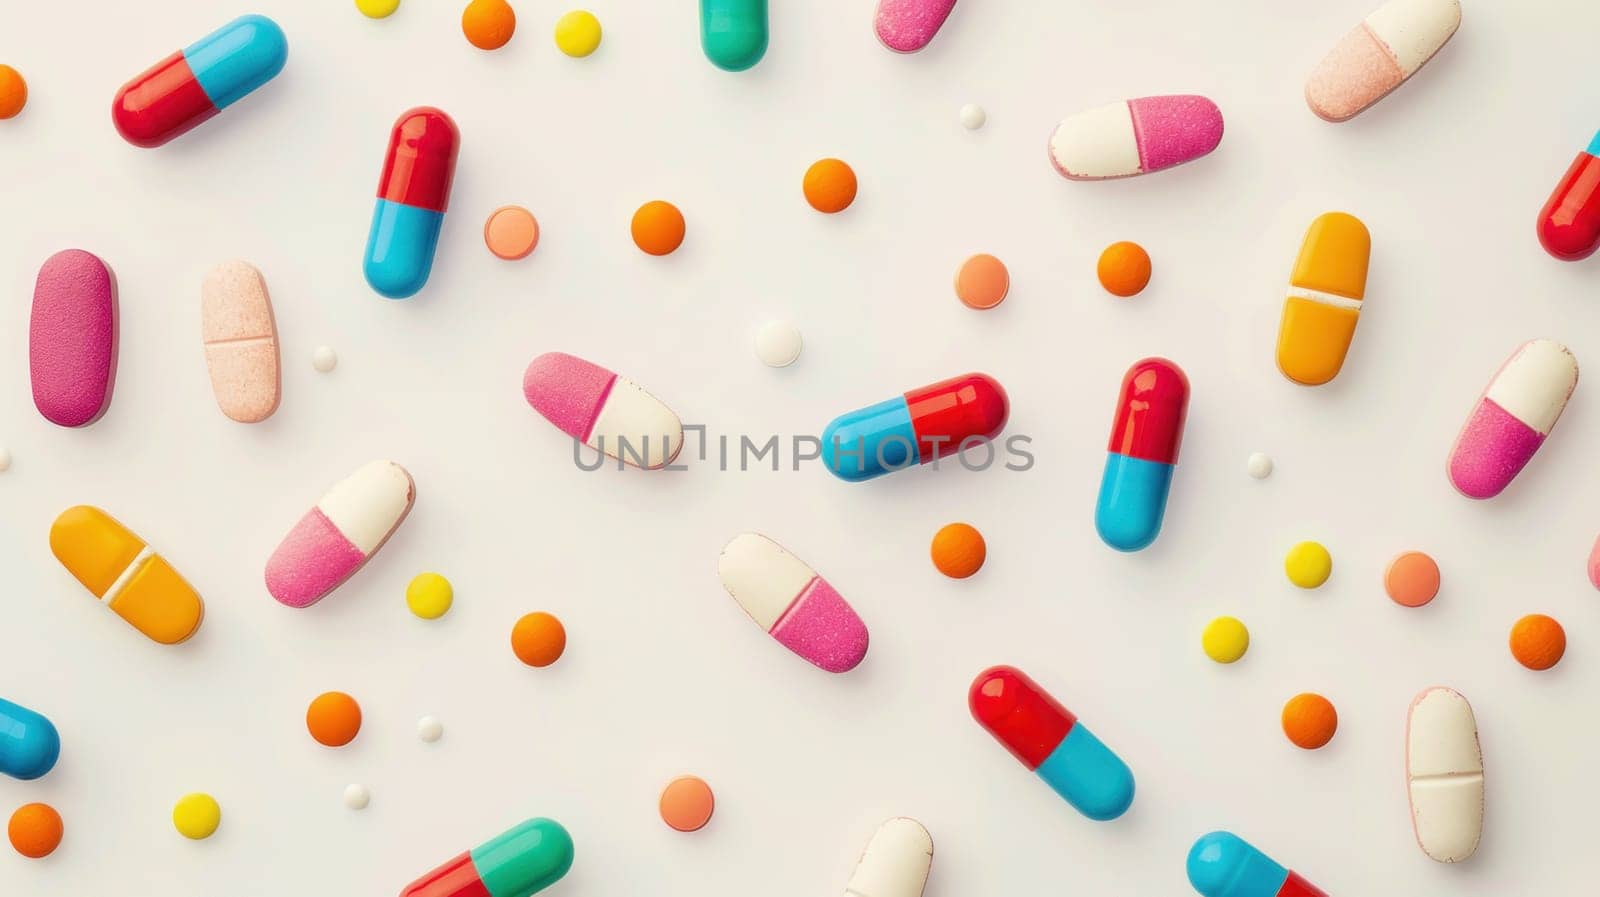 Colorful pills scattered on a white surface in a medical flat lay arrangement with top view perspective